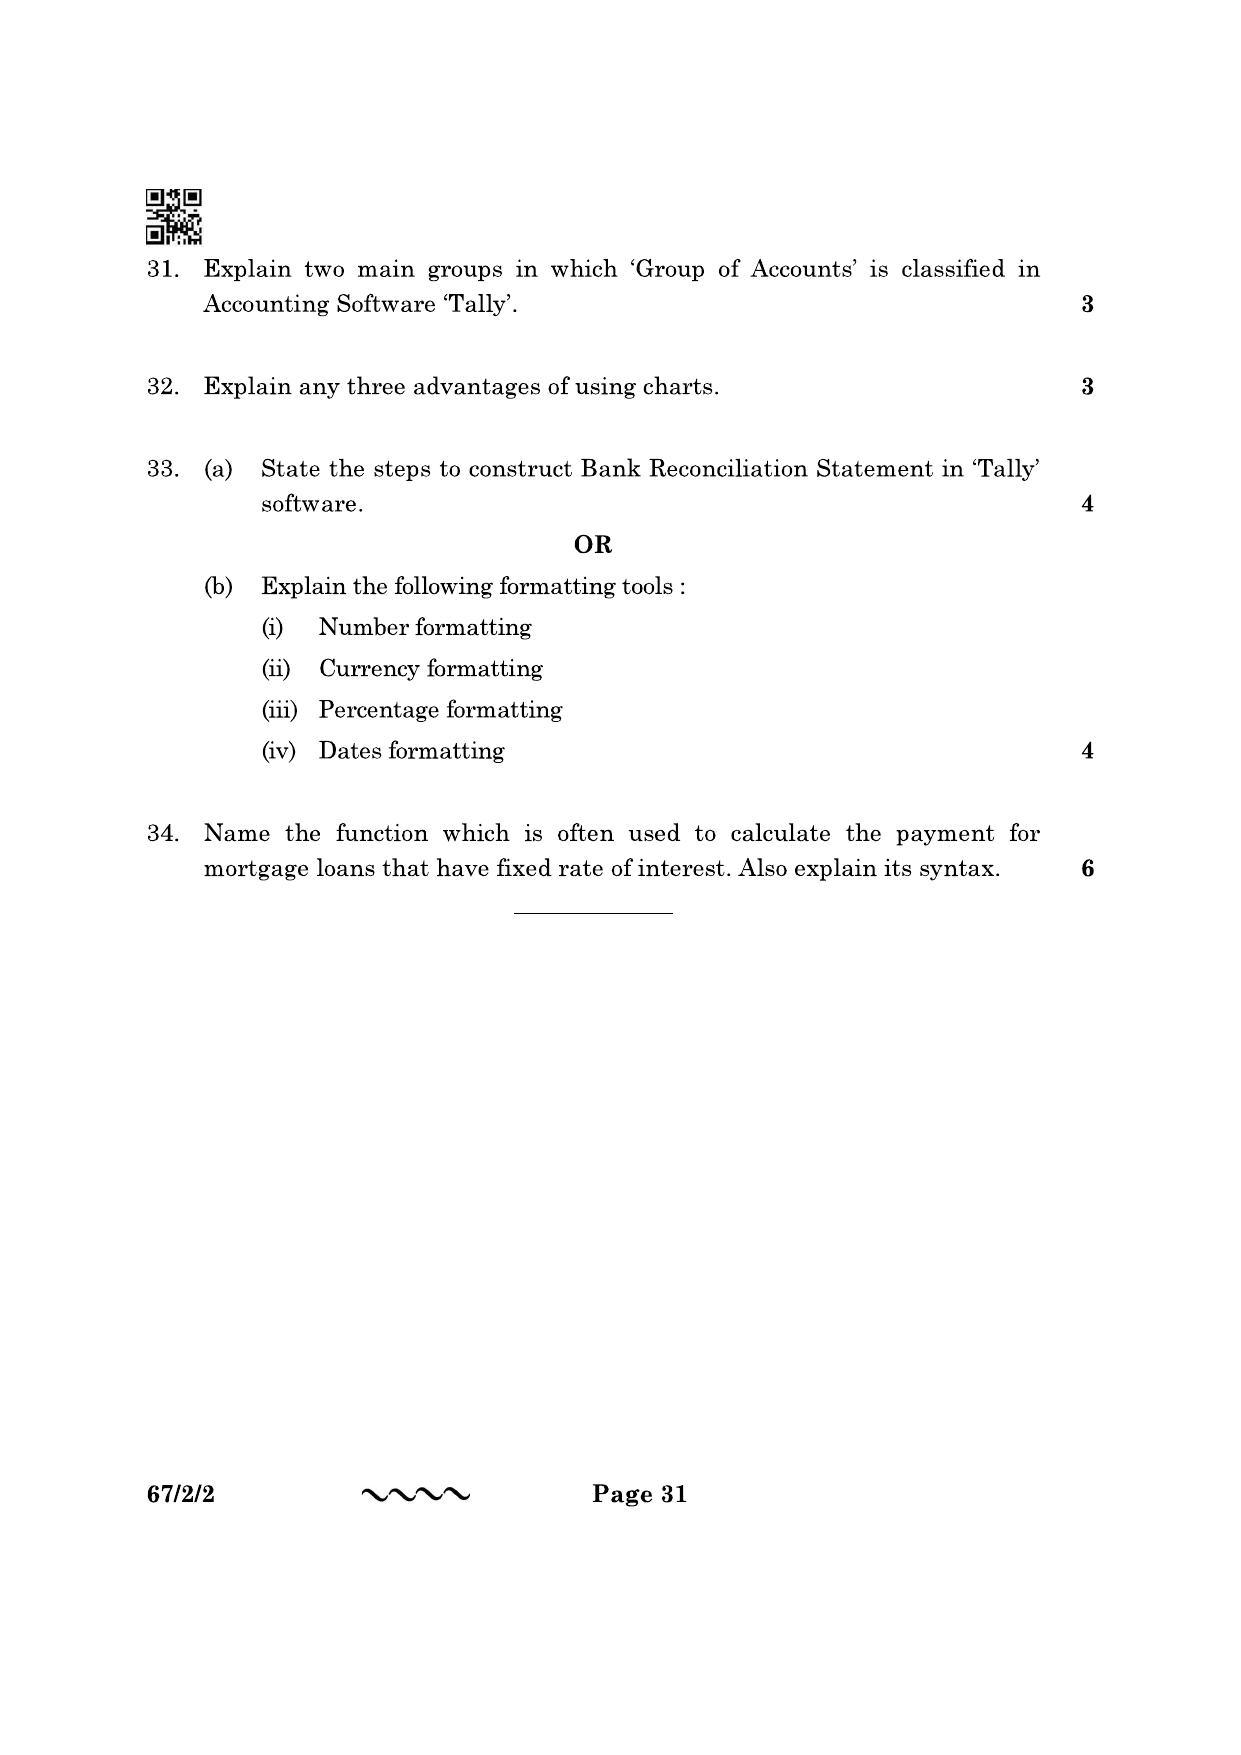 CBSE Class 12 67-2-2 Accountancy 2023 Question Paper - Page 31